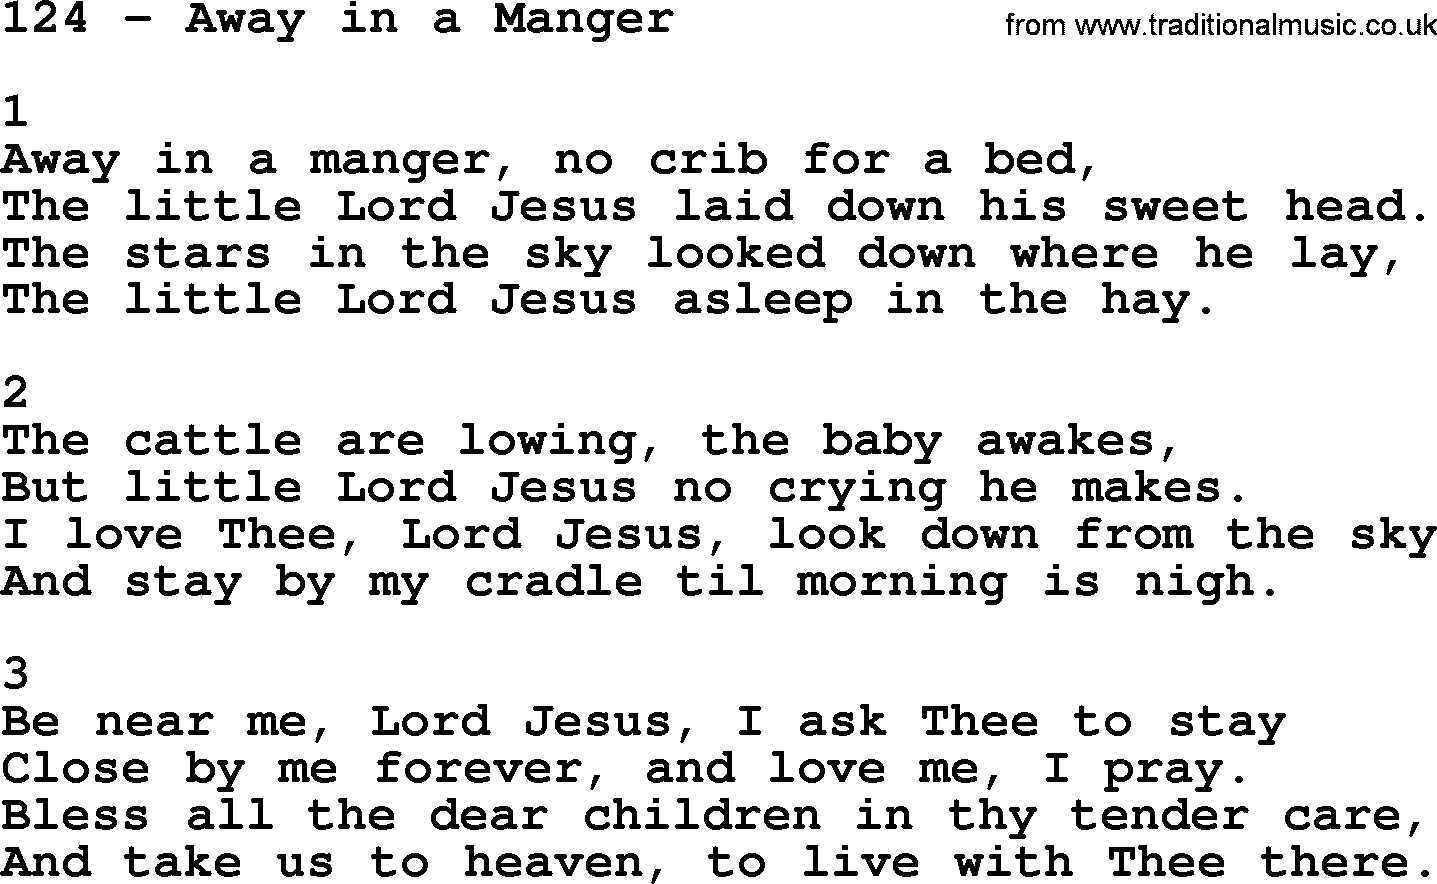 Complete Adventis Hymnal, title: 124-Away In A Manger, with lyrics, midi, mp3, powerpoints(PPT) and PDF,